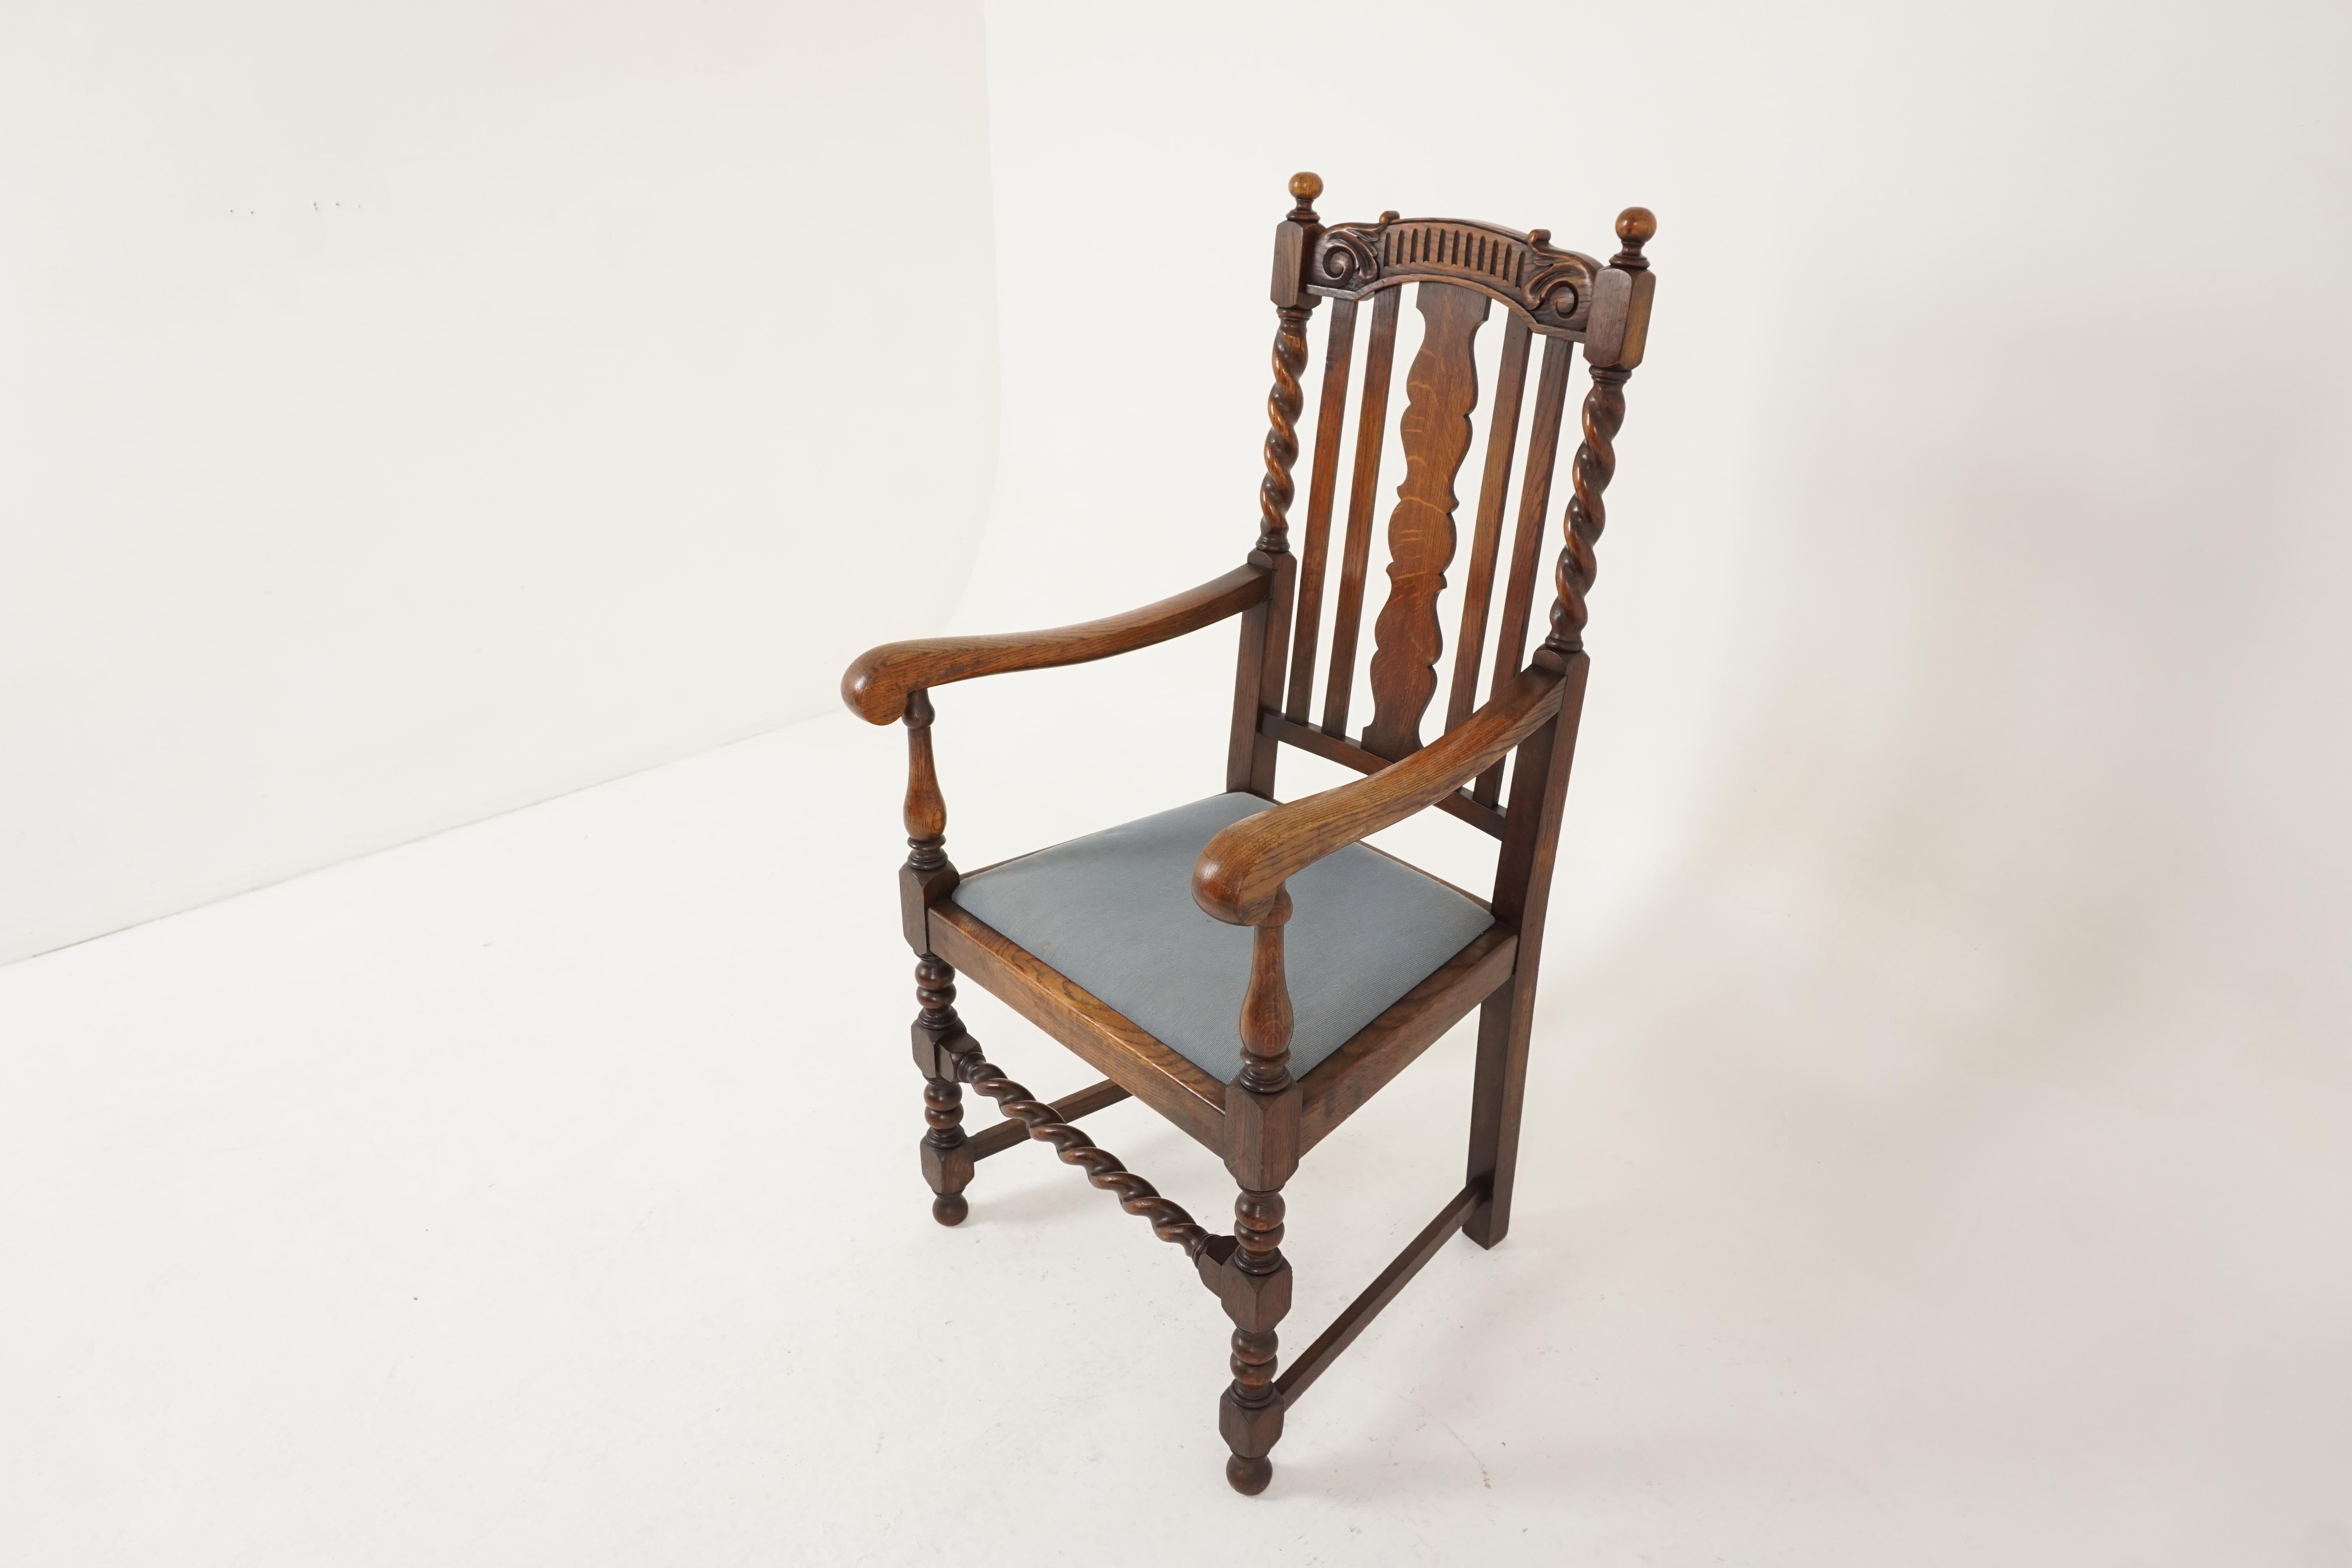 Antique armchair, carved oak, barley twist armchair, Scotland 1920, B2158.

Scotland, 1920
Solid oak
Original finish
Carved rail to the top
Five vertical slats to the back
Flanked by a pair of barley twist supports
Thick out swept